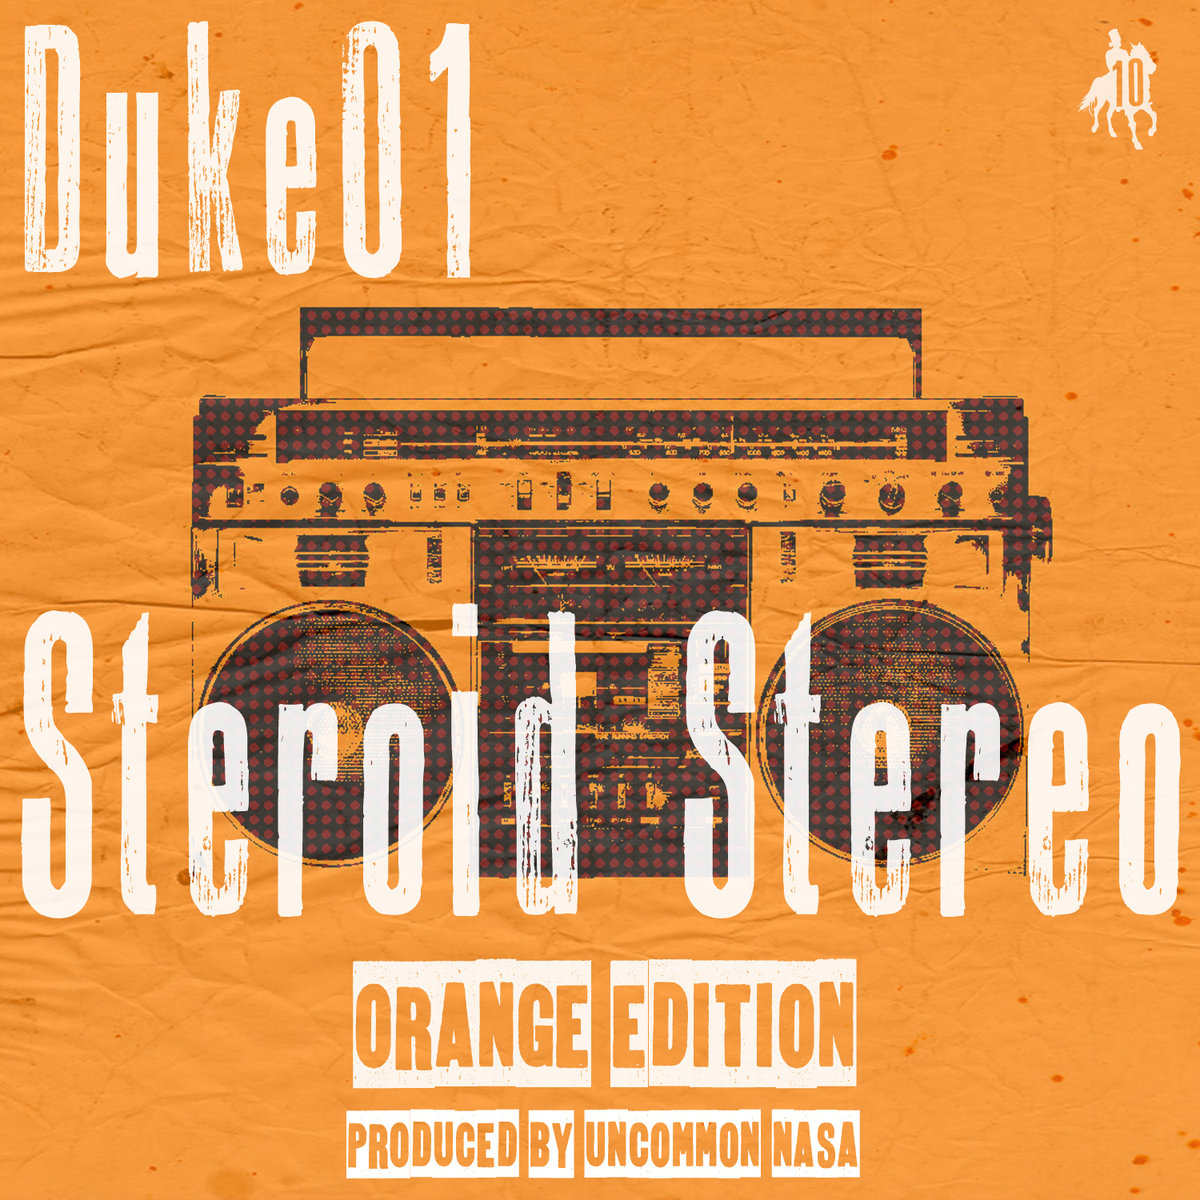 Steroid Stereo [2014]